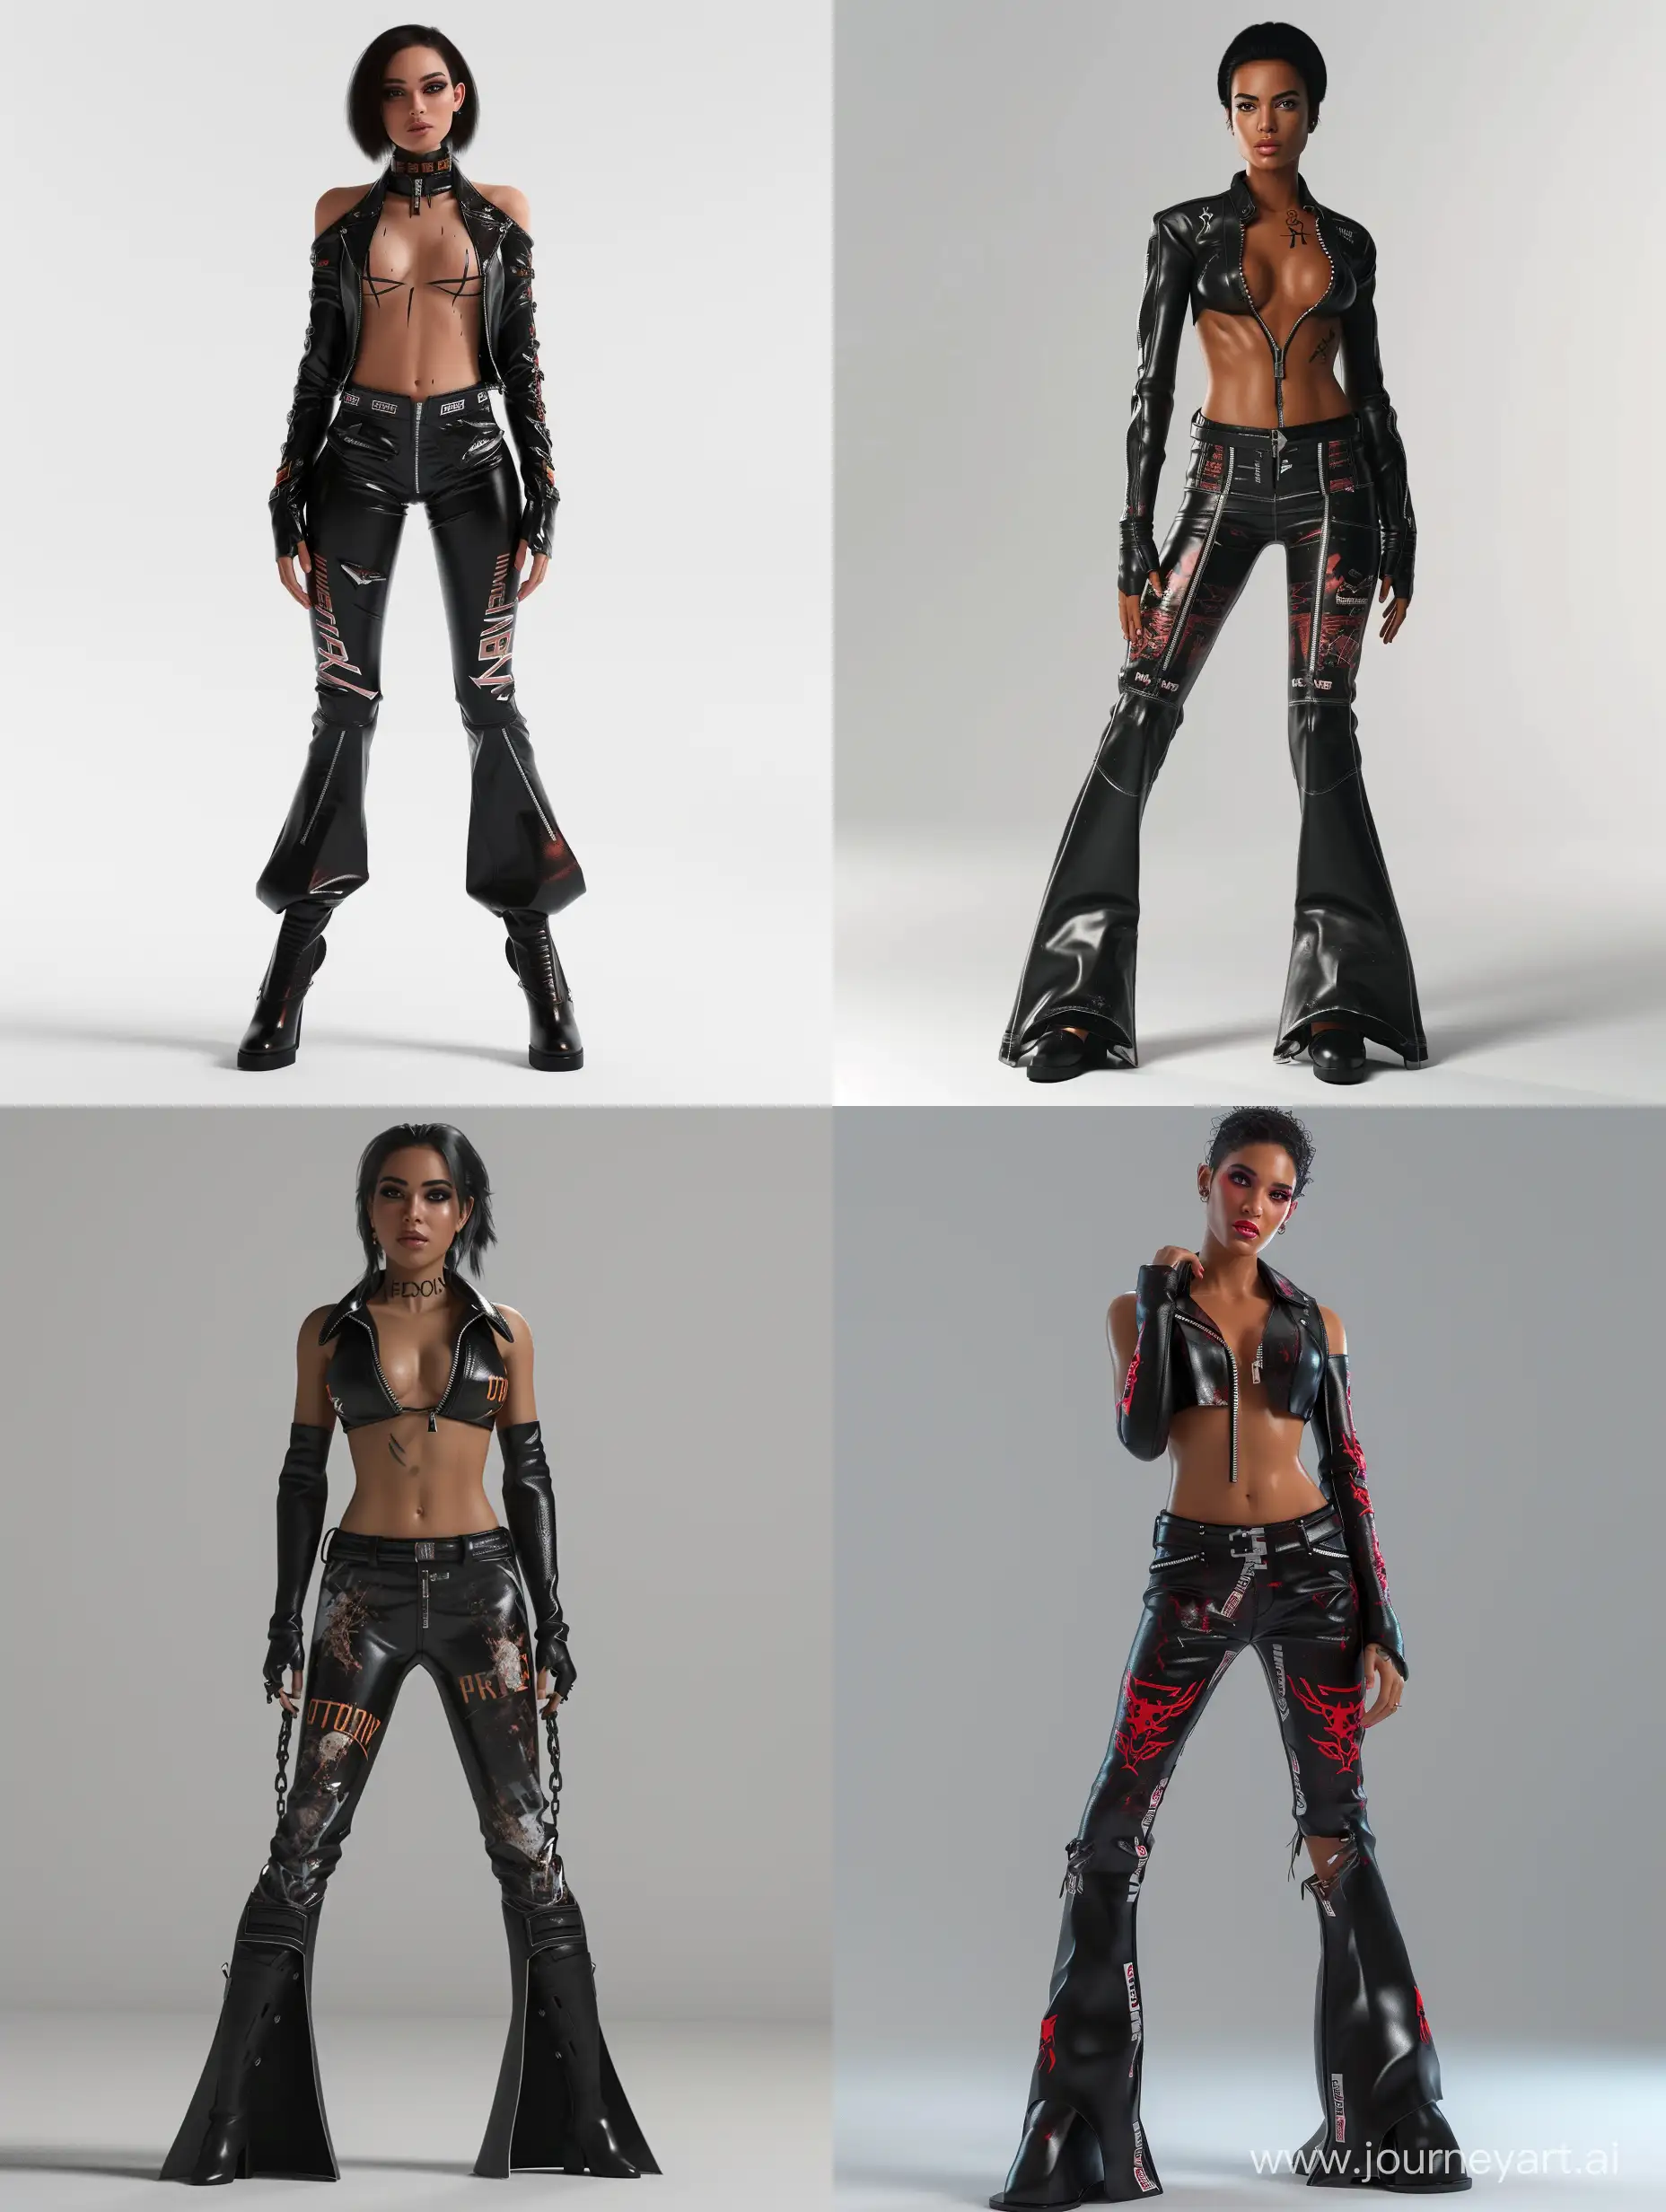 Render, 3D, 2000's Game Graphics, 2000's Video Game, Poster, Woman, Latina, Femininity, Brutality, Athletic Body, Dark Skin, Dark Hair, Short Hair, Makeup, Tight Black Leather Zip Top with Racing Print, Cleavage, Long Sleeves, Black Flared Leather Pants with Racing Print, Black Boots, Brutal Pose, Smirk on Face, Blank Background